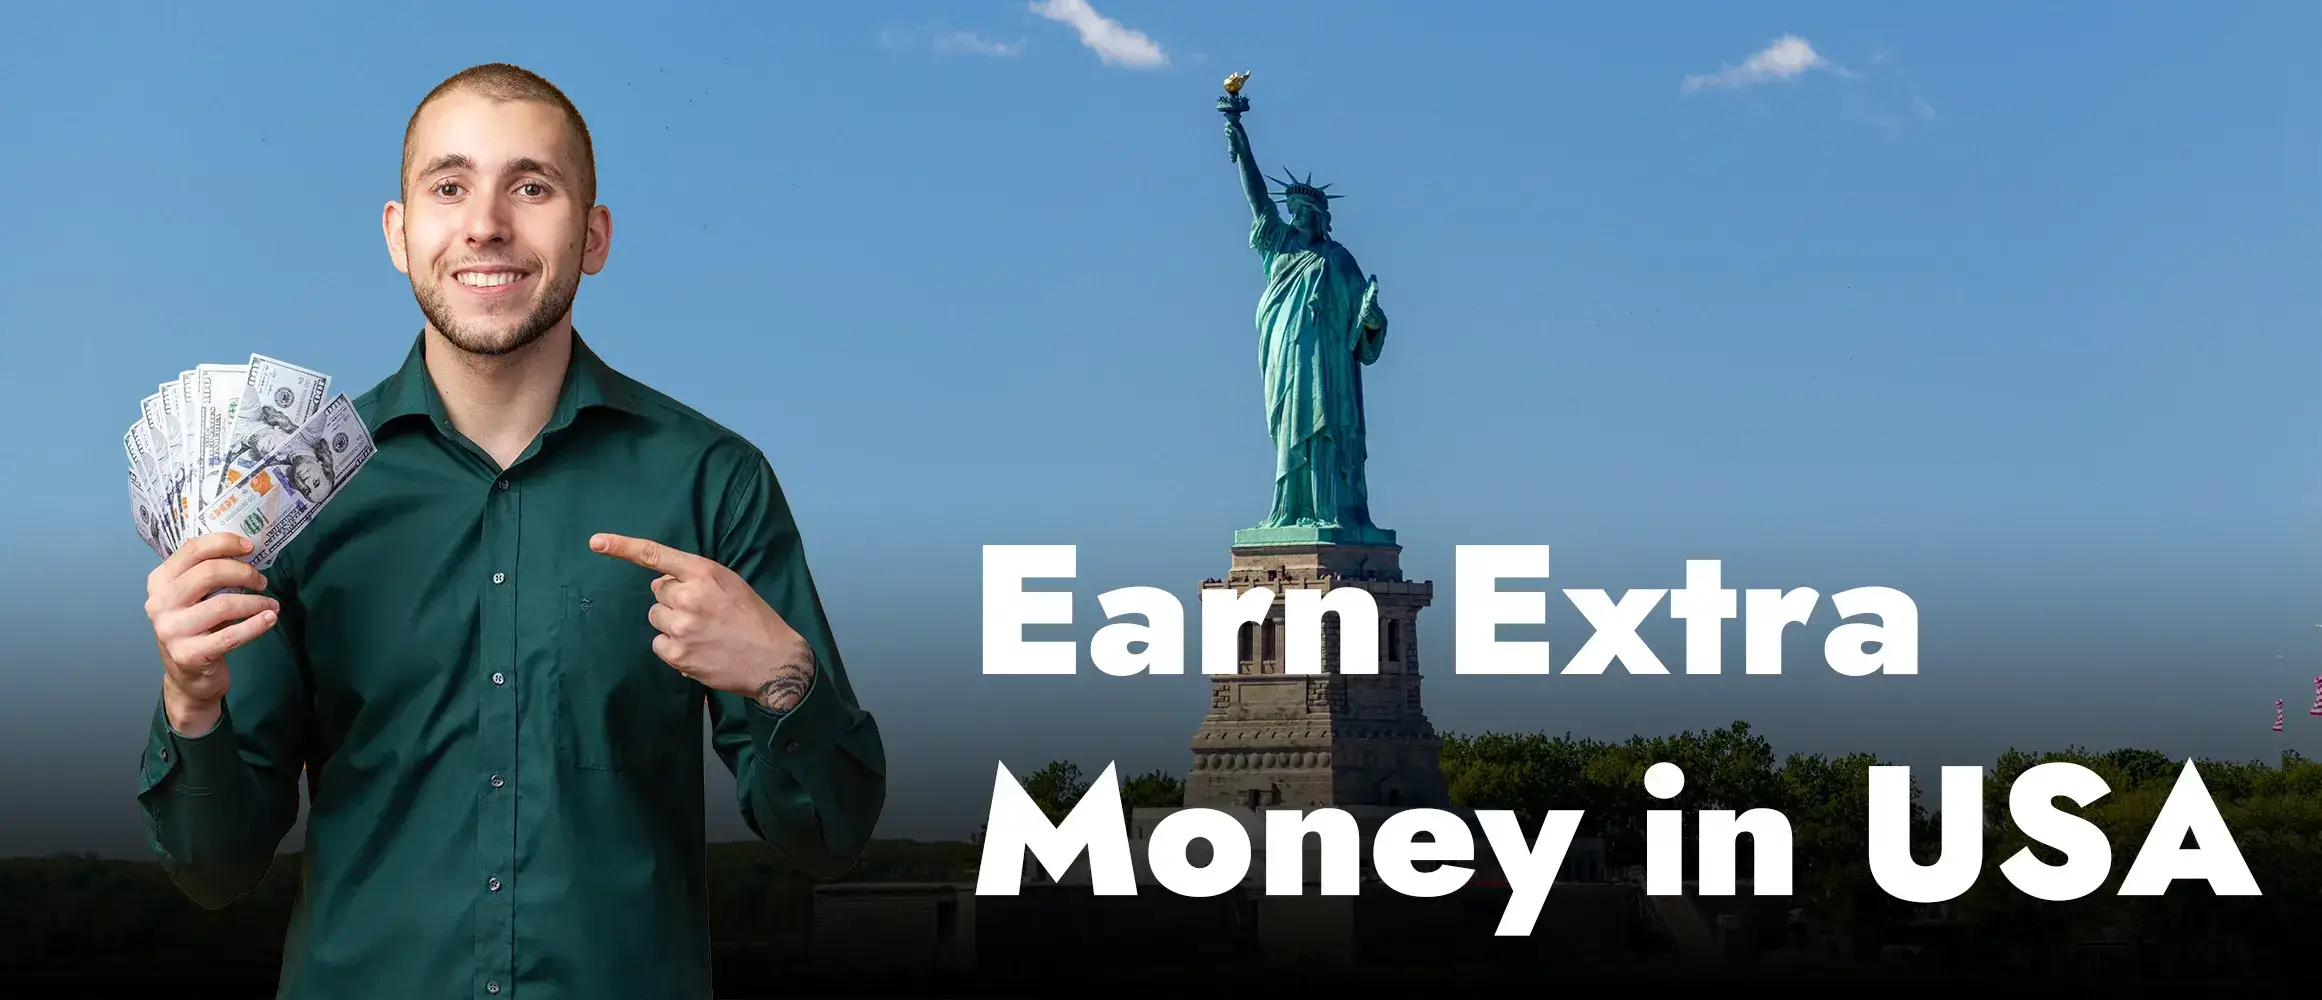 How can an International Students Earn Extra Money in the USA